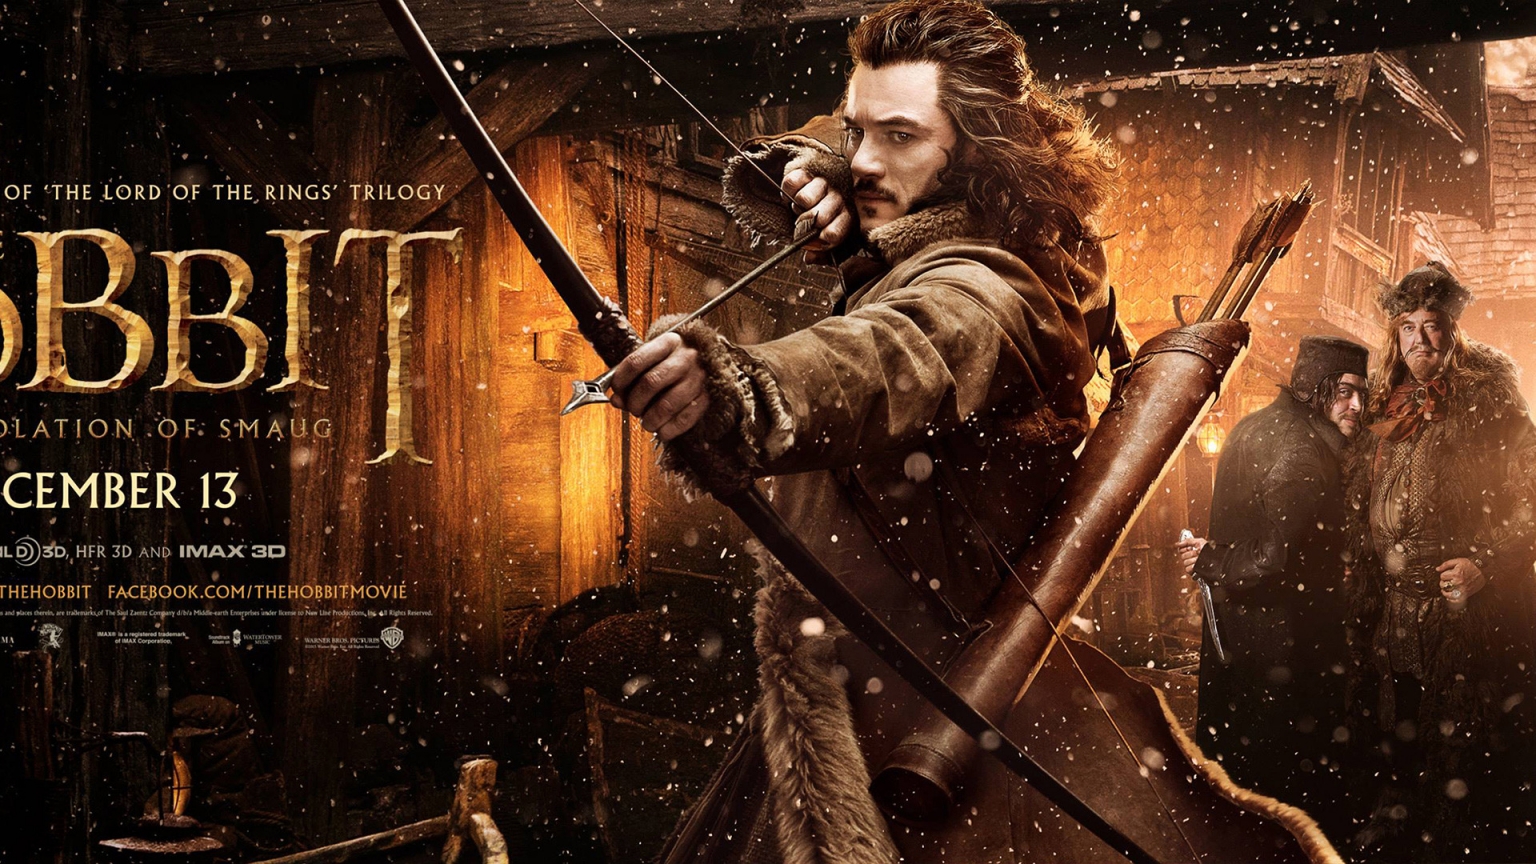 Bard the Bowman The Hobbit for 1536 x 864 HDTV resolution